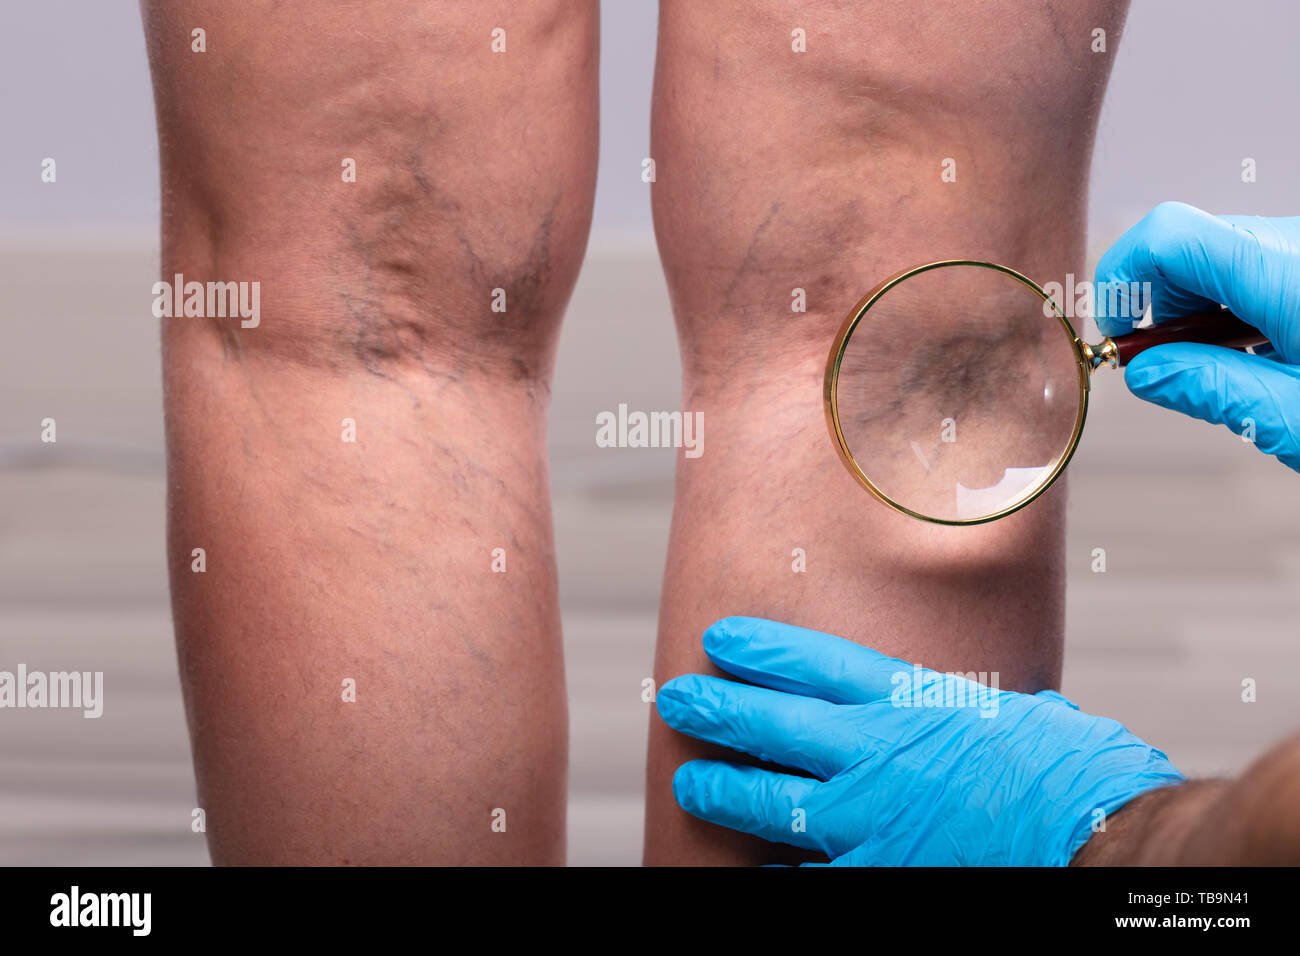 Close-up Of A Surgeon Wearing Blue Surgical Gloves Examining The Varicose Veins Through Magnifying Glass Stock Photo